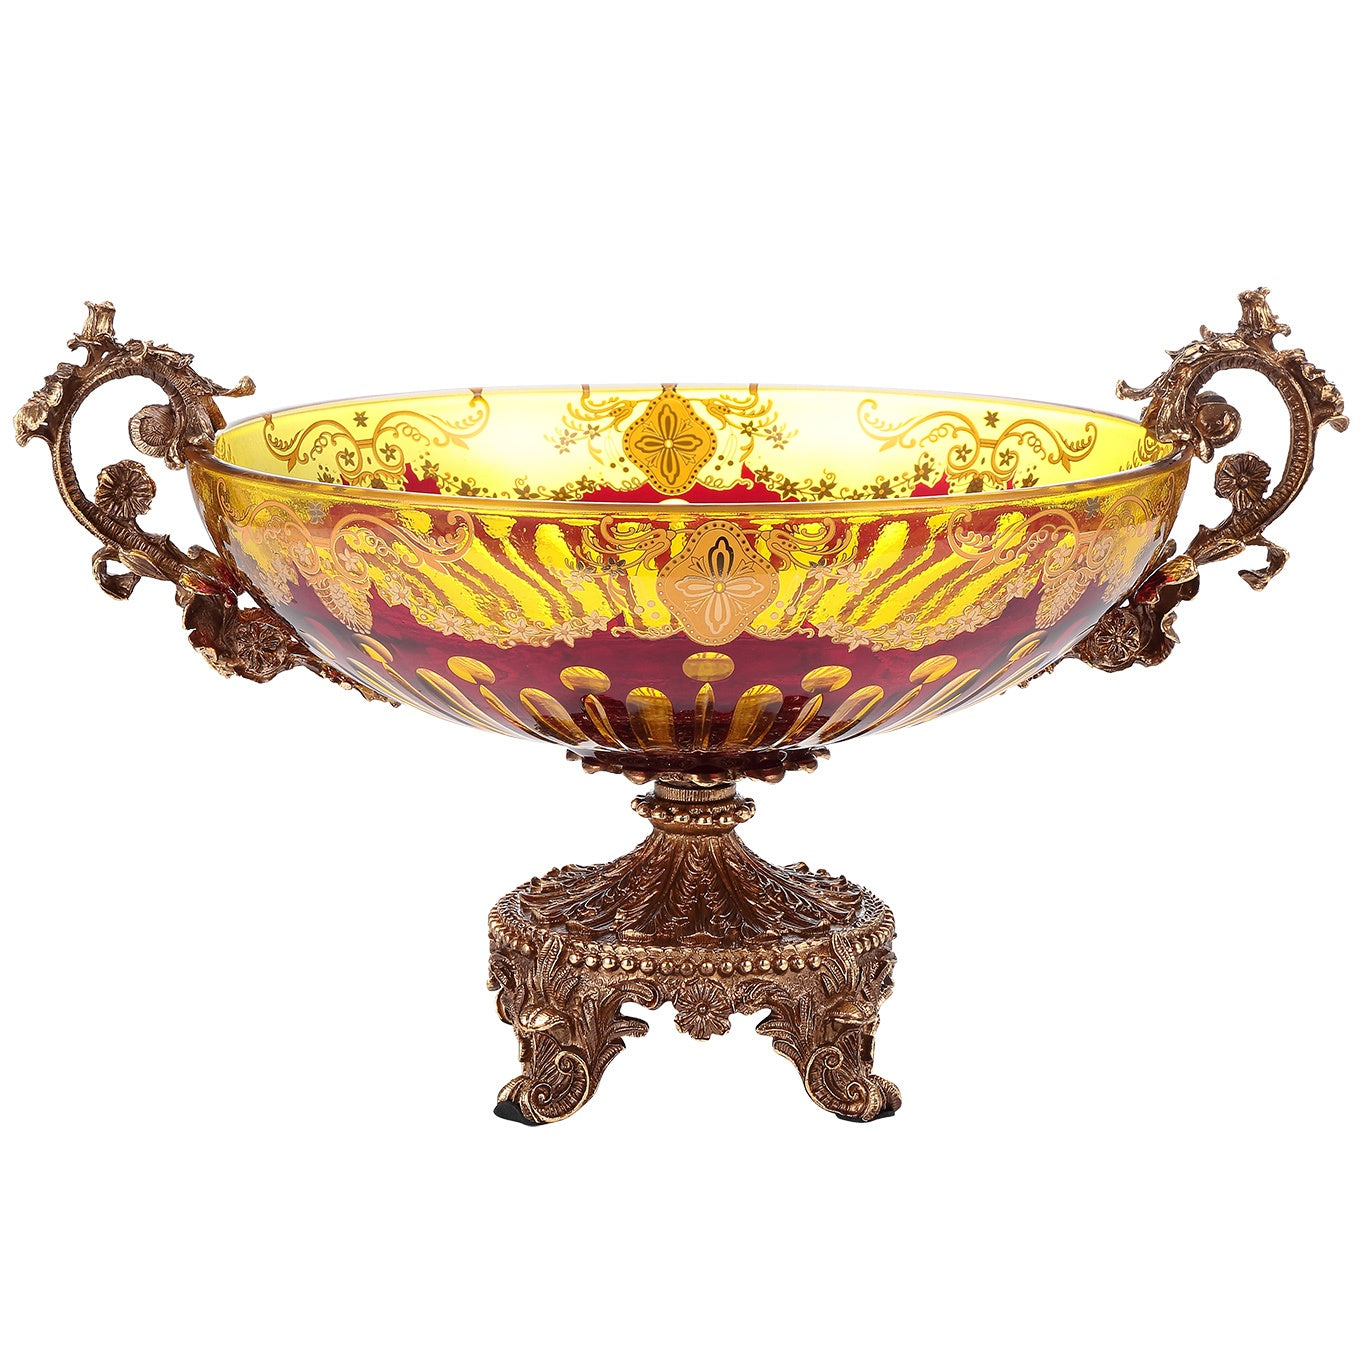 Bowl in Bronze & Amber & Ruby Red-Gold Finish AC3001 European Victorian